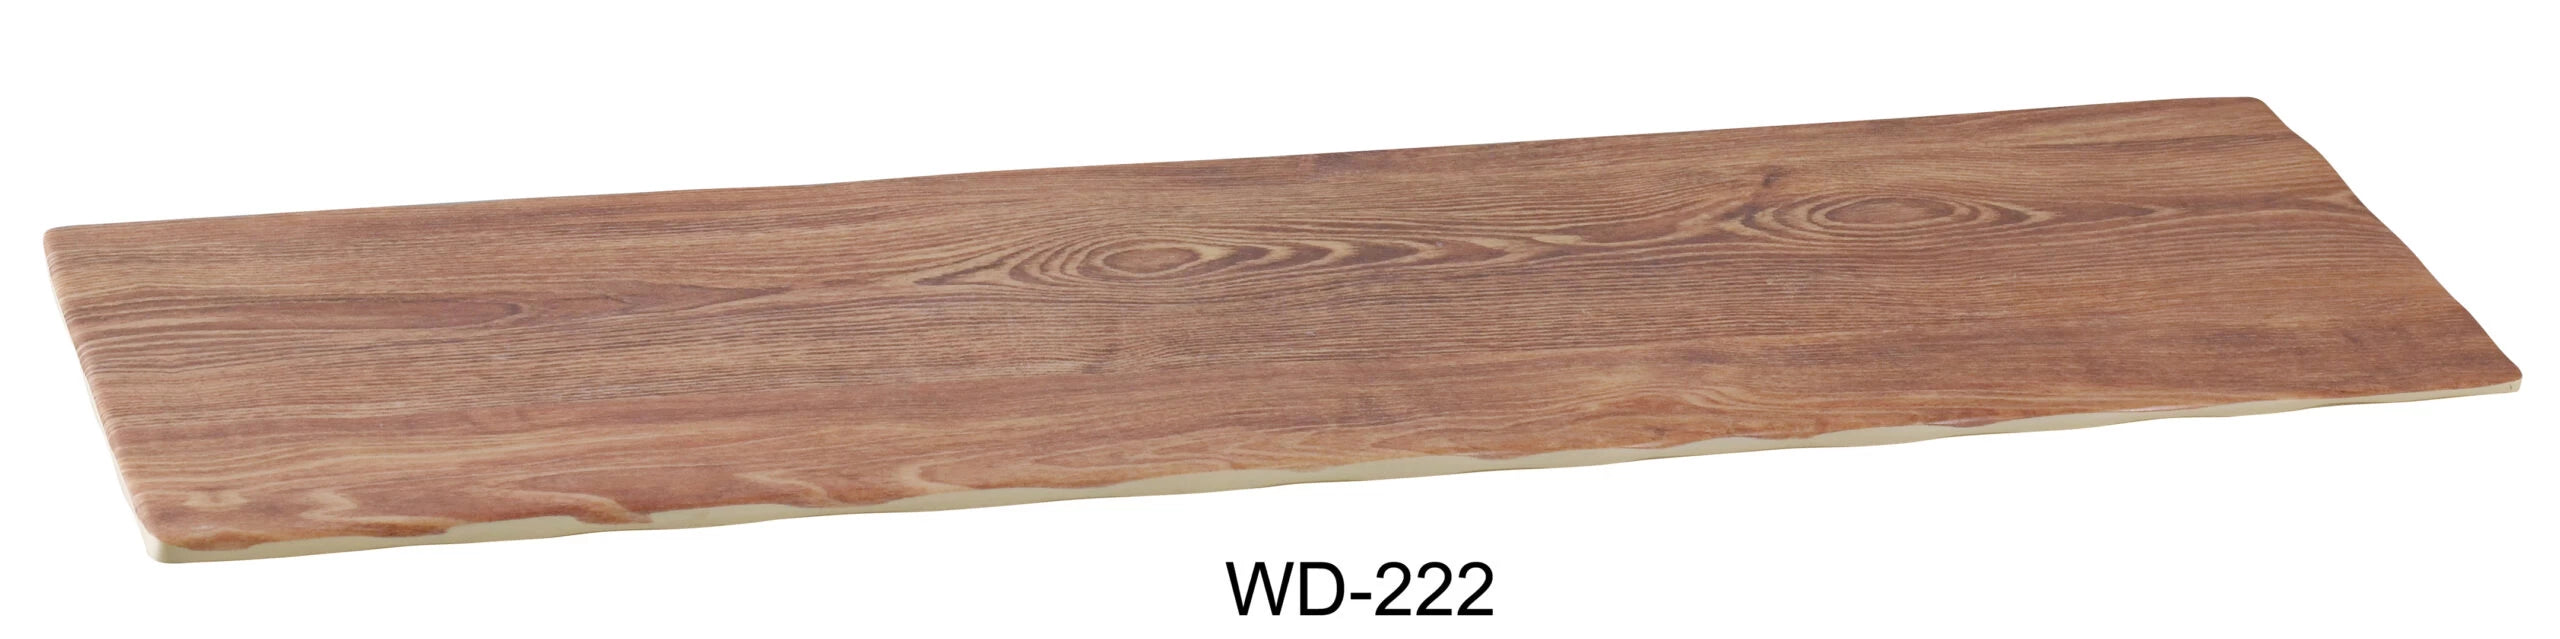 Yanco WD-222 Rectangular Wooden Tray, 21″ Length, 6.5″ Width, Melamine, Brown Color, Pack of 6